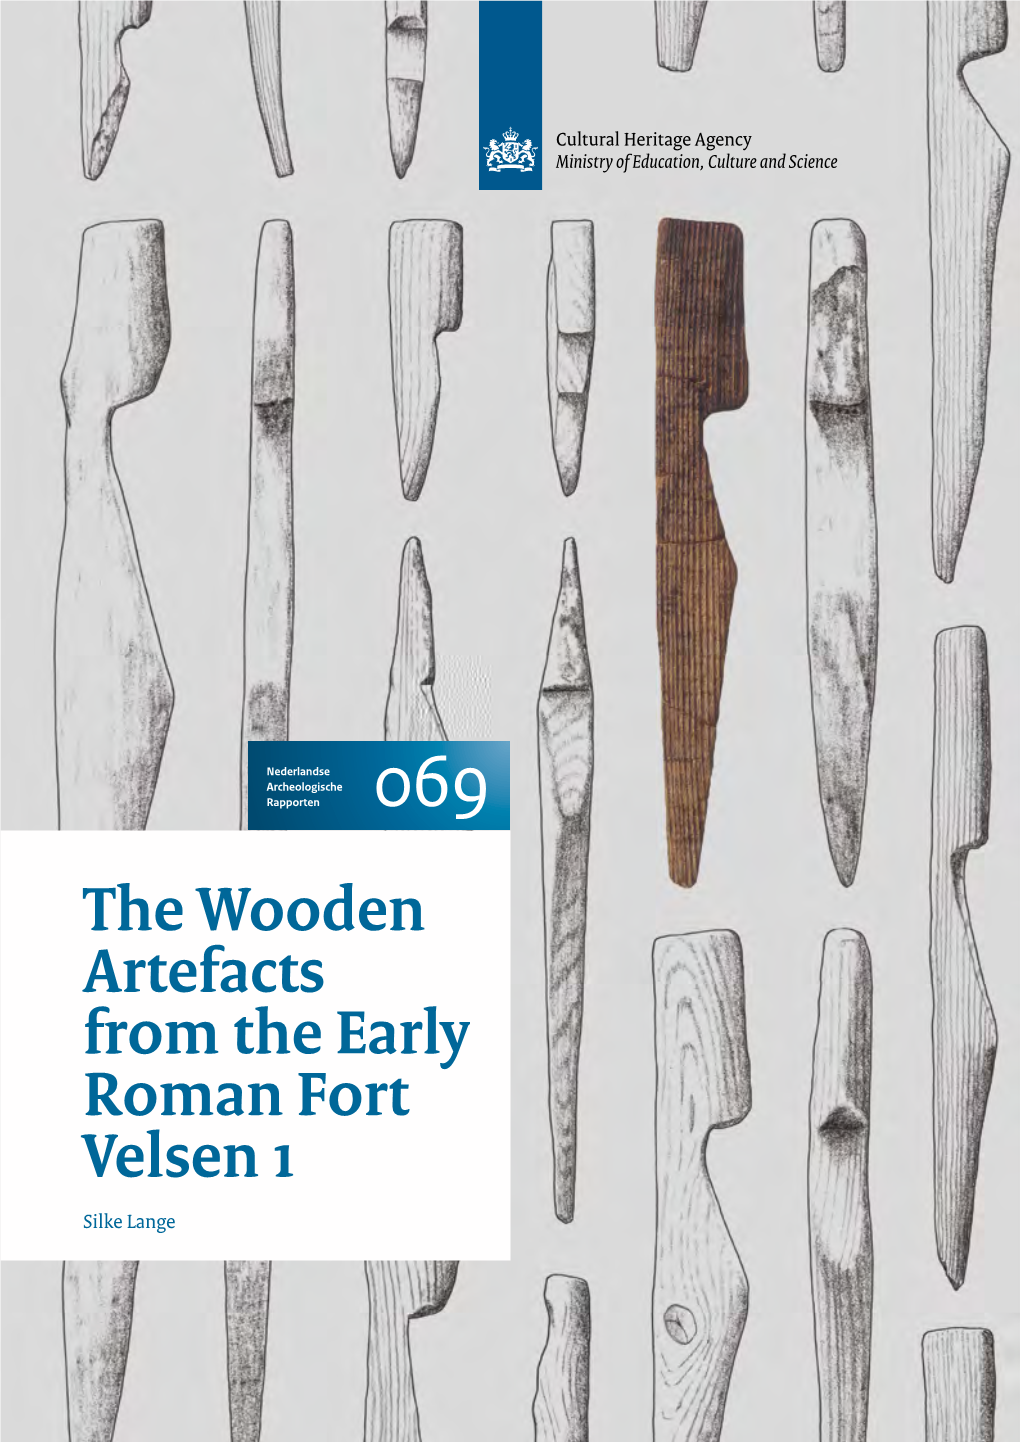 The Wooden Artefacts from the Early Roman Fort Velsen 1 Silke Lange the Wooden Artefacts from the Early Roman Fort Velsen 1